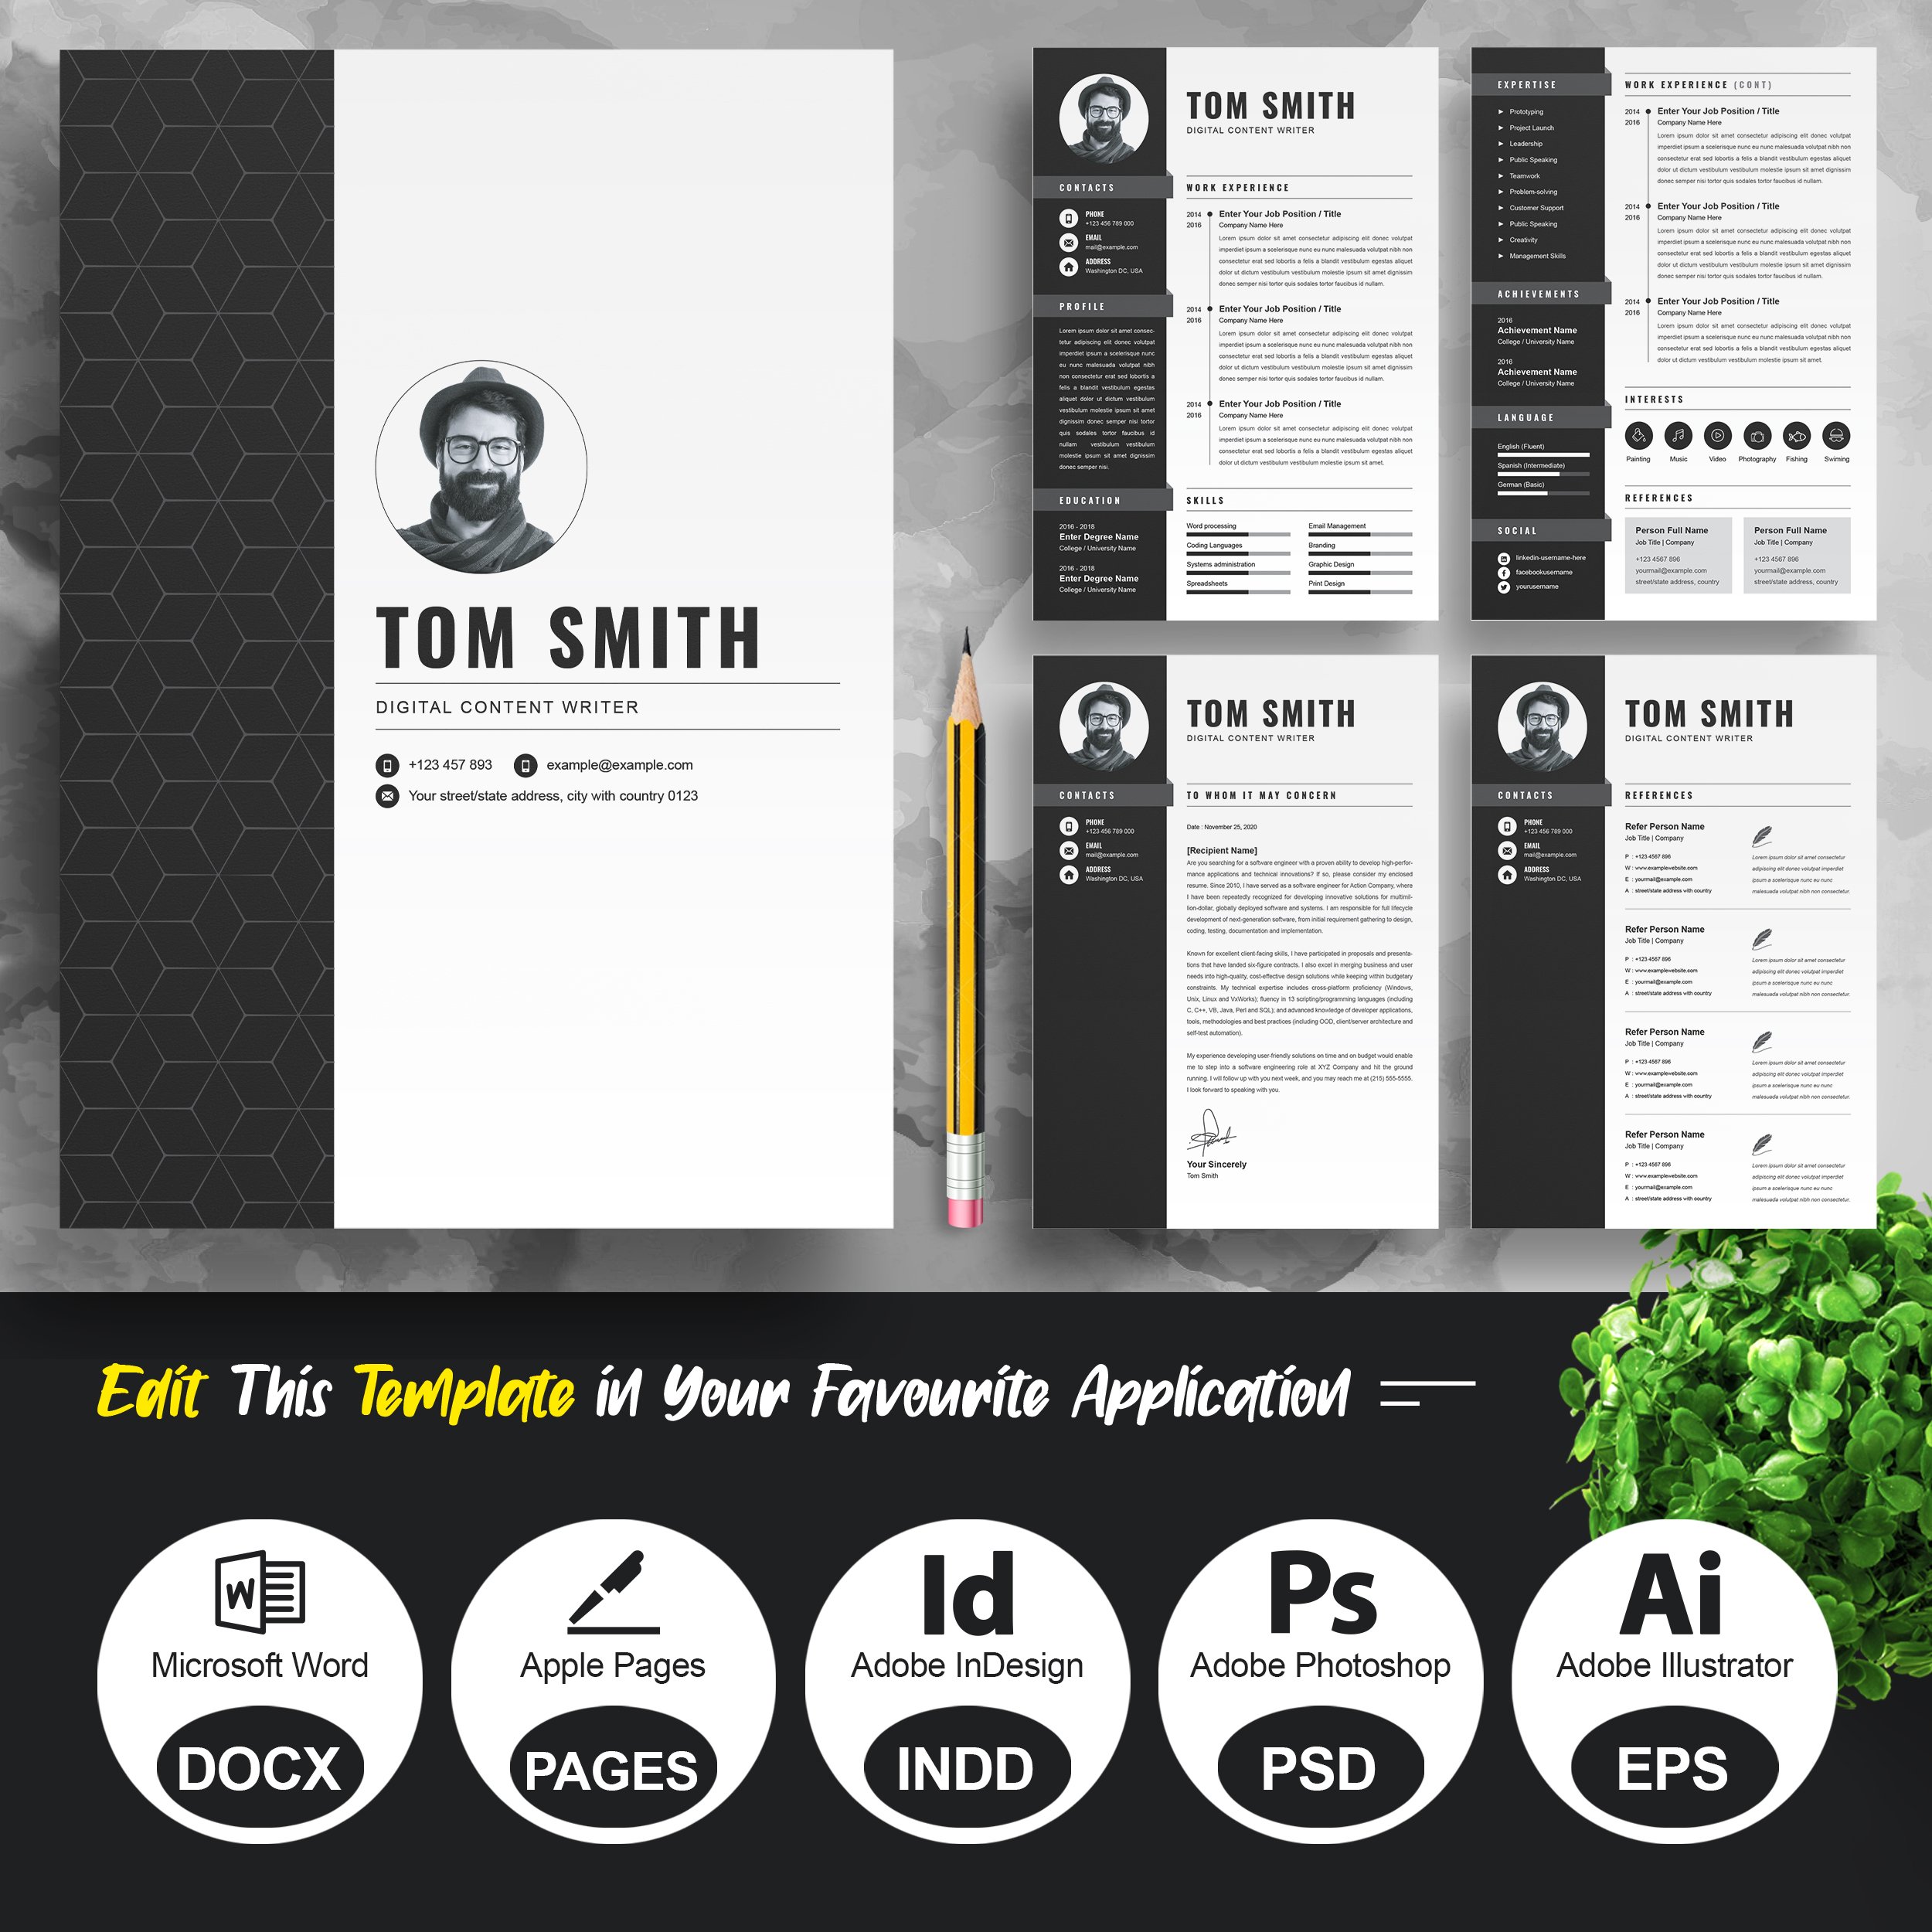 Professional Resume Template 2021 preview image.